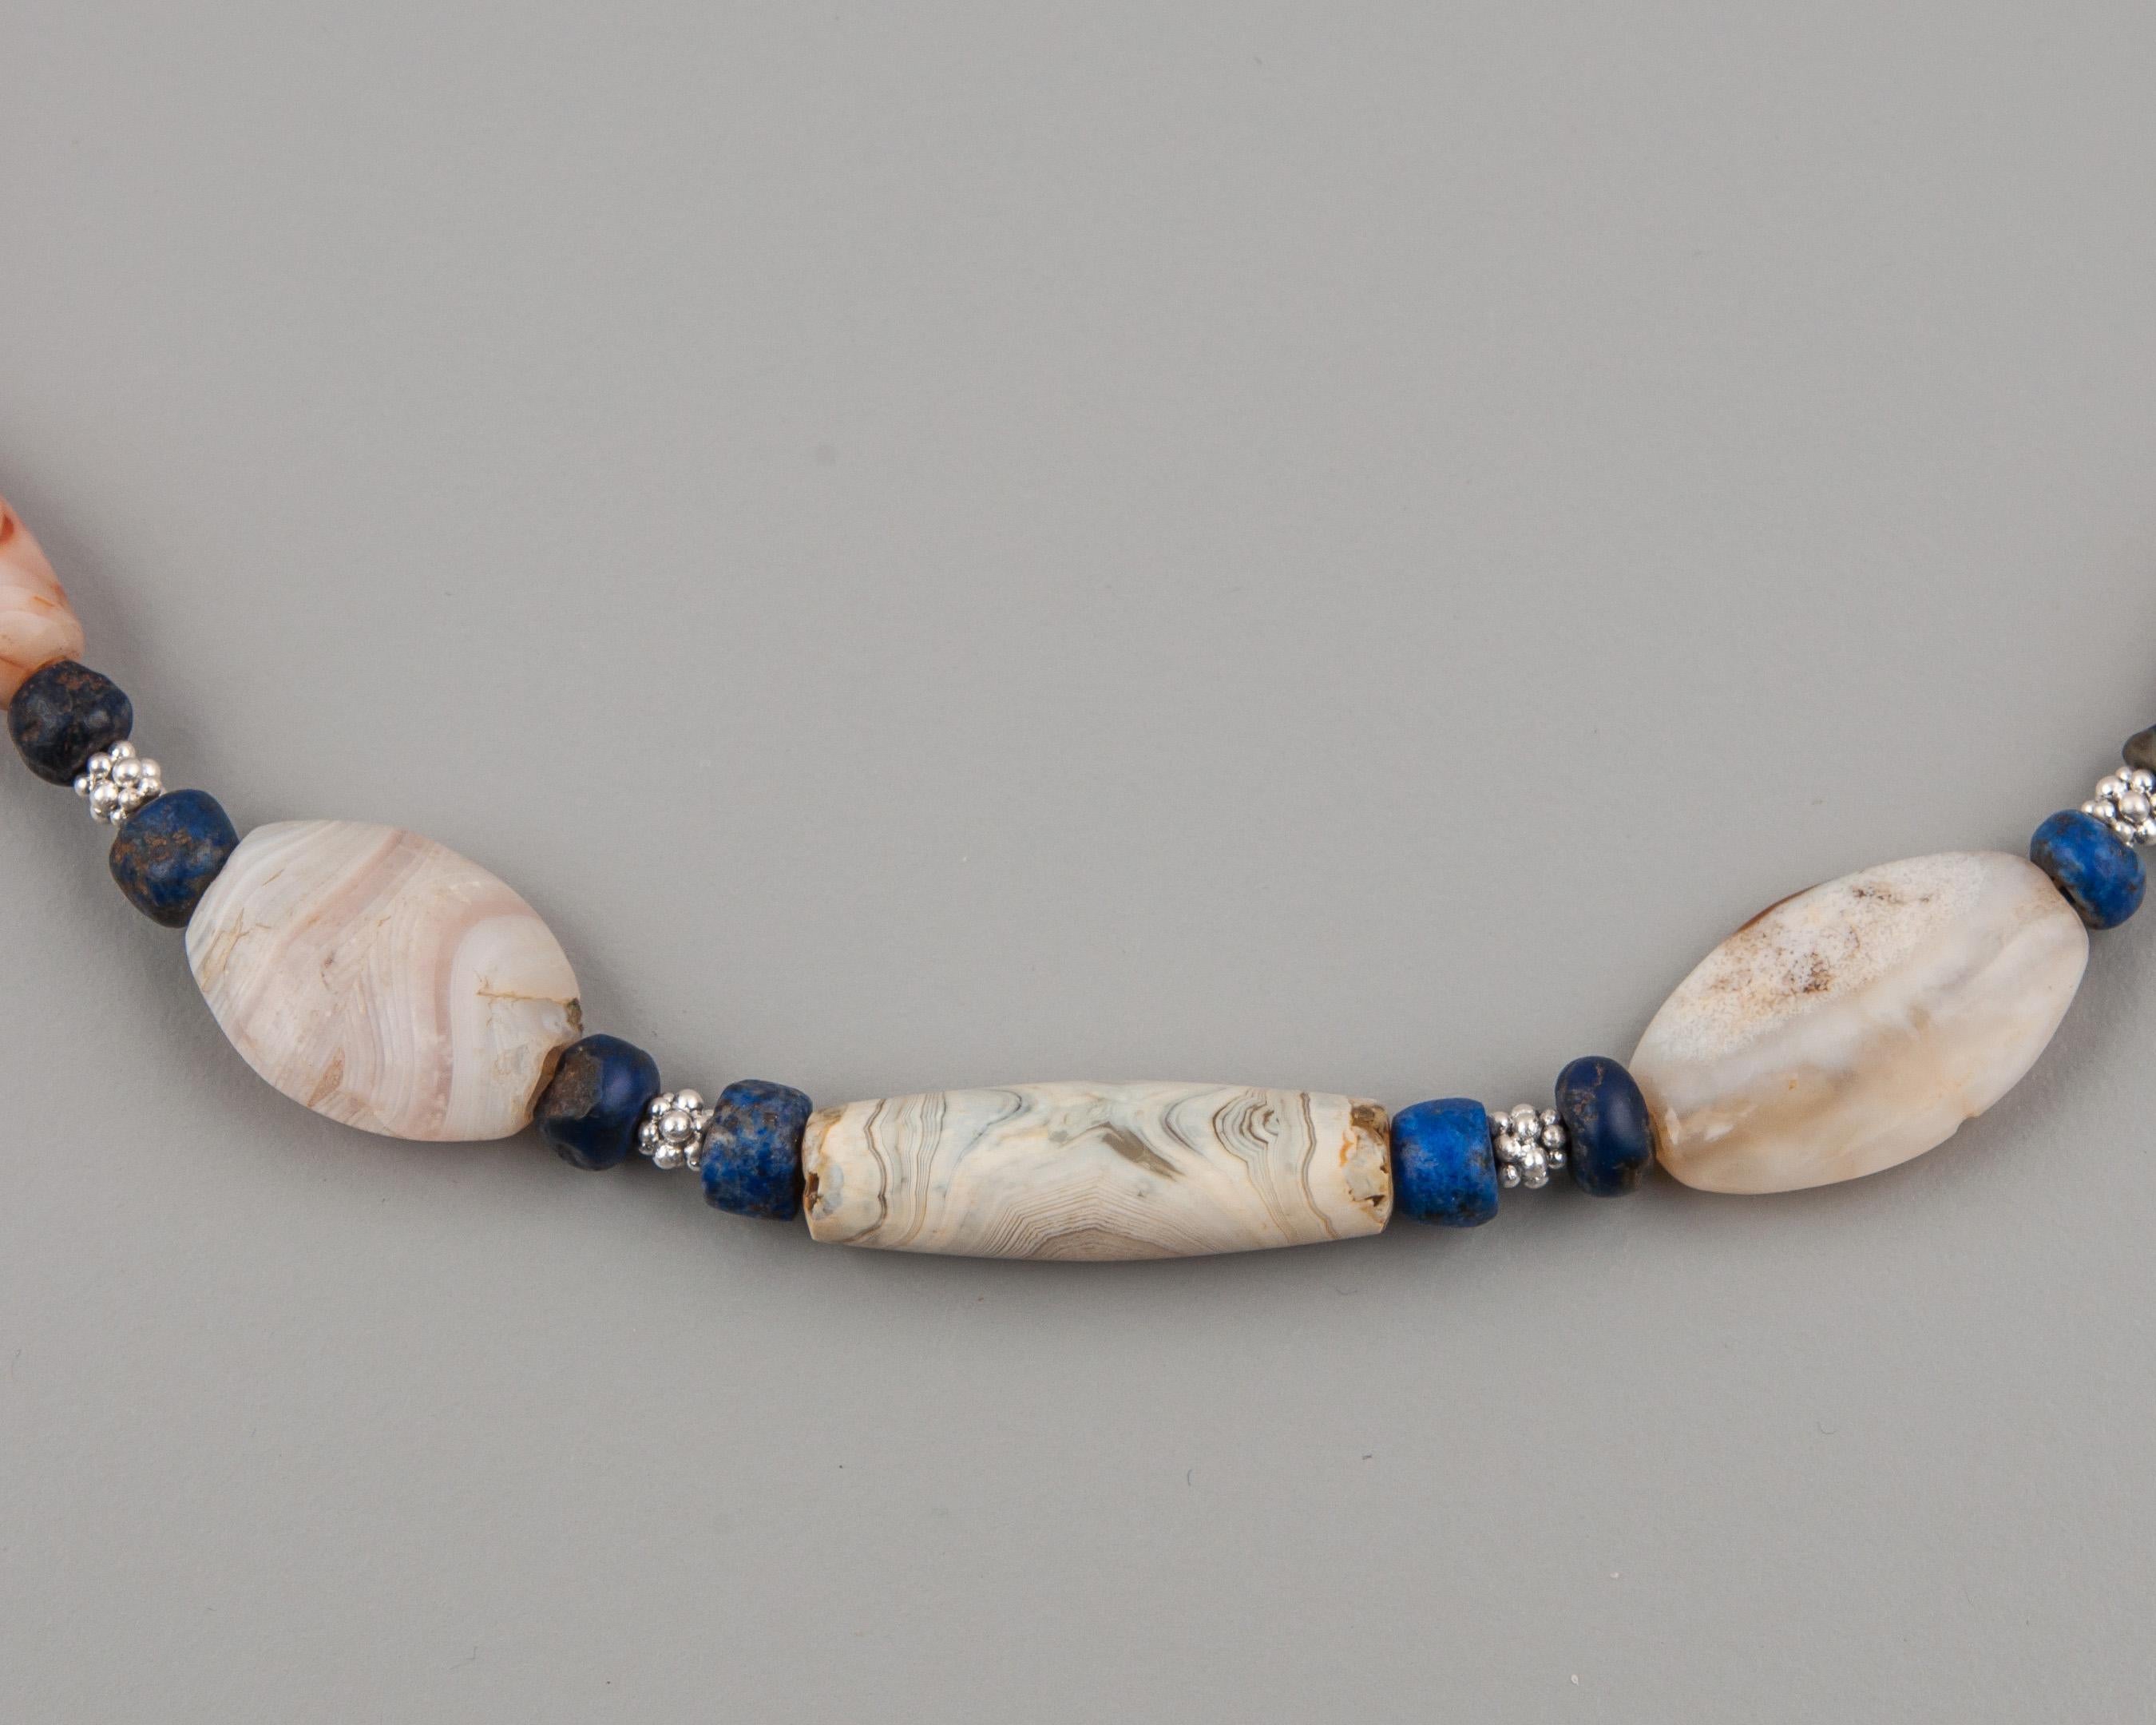 Fifteen agate beads, forty-two lapis lazuli beads and eighteen granulated silver beads. The agate beads are from the early Bronze Age. They are at least four thousand years old (and some are older). Between each of the larger beads is a group of